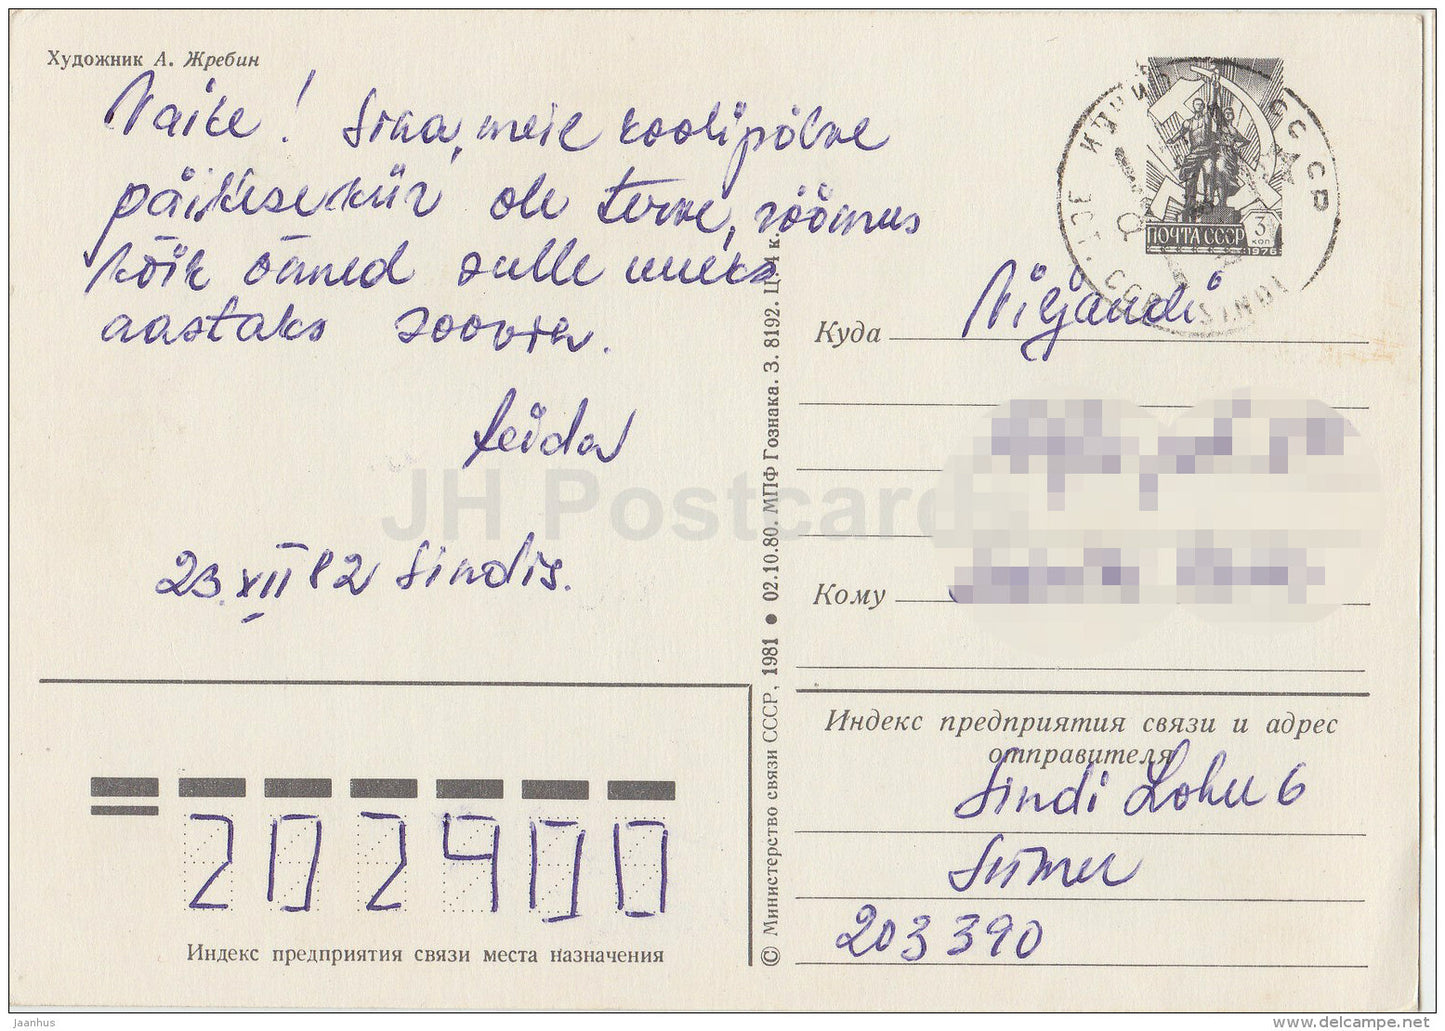 New Year Greeting Card by A. Zhrebin - Ded Moroz - Santa Claus - radio - postal stationery - 1981 - Russia USSR - used - JH Postcards